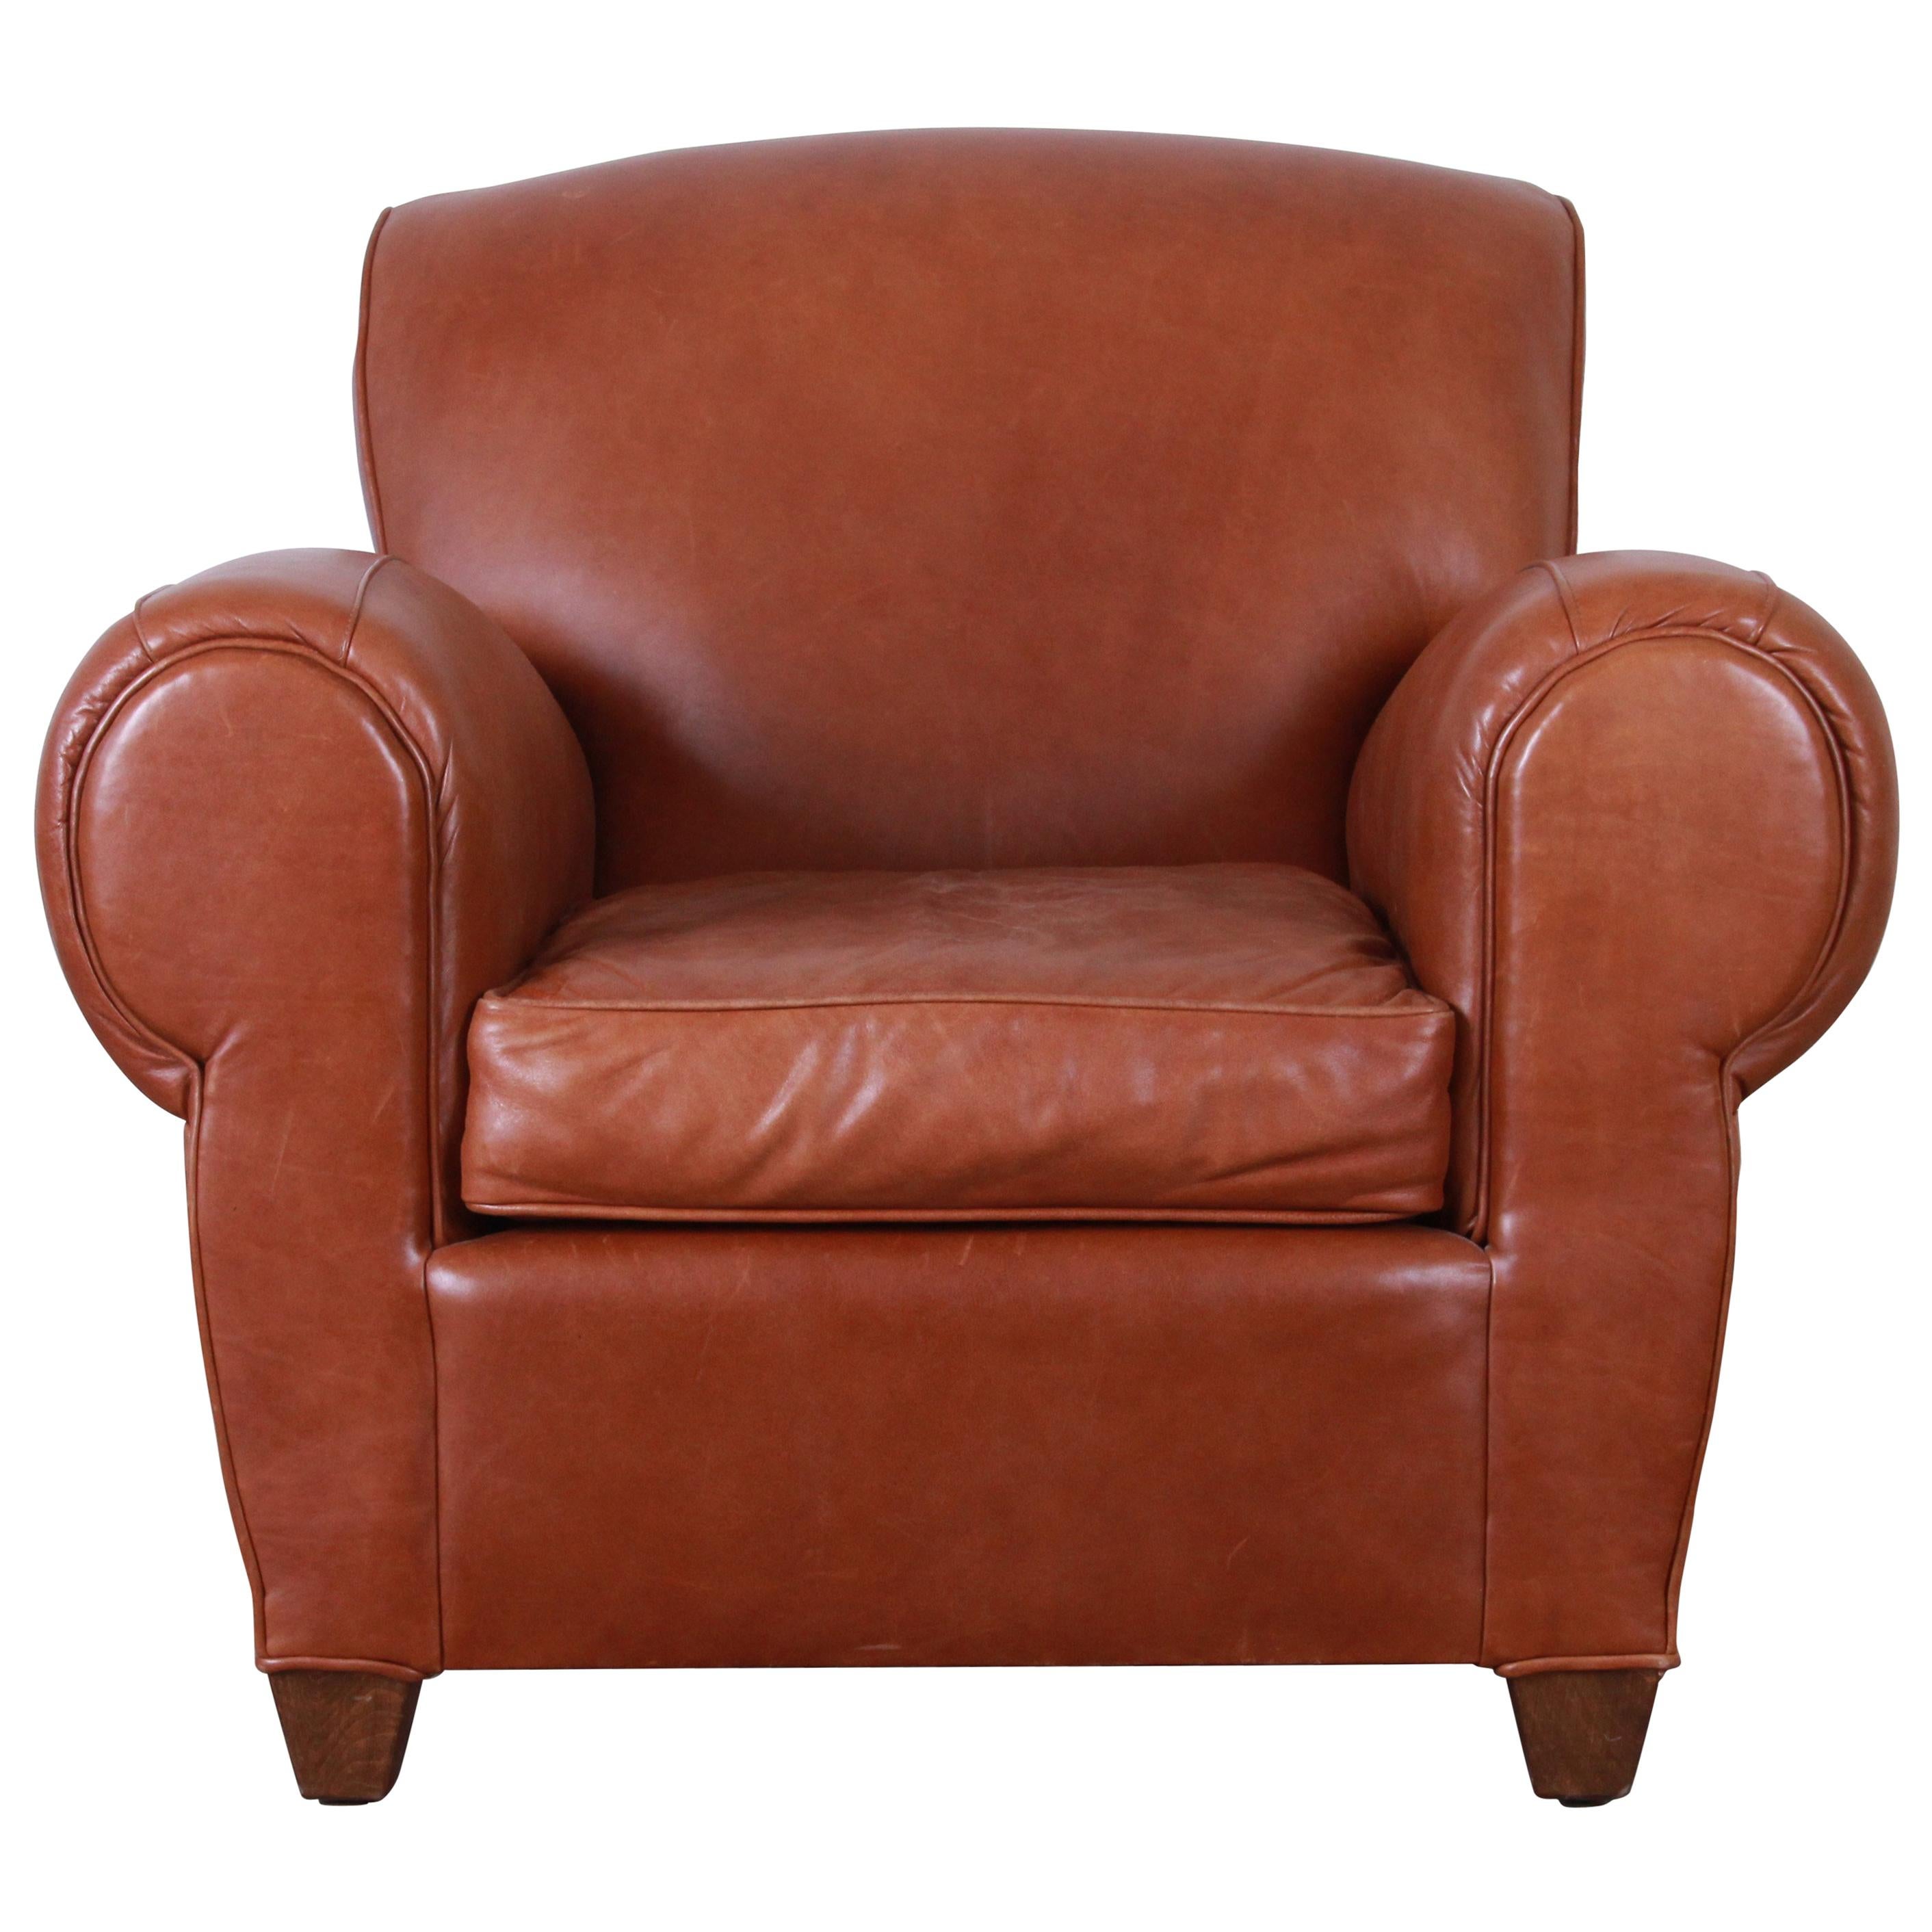 Art Deco Style Brown Leather Club Chair by Mitchell Gold